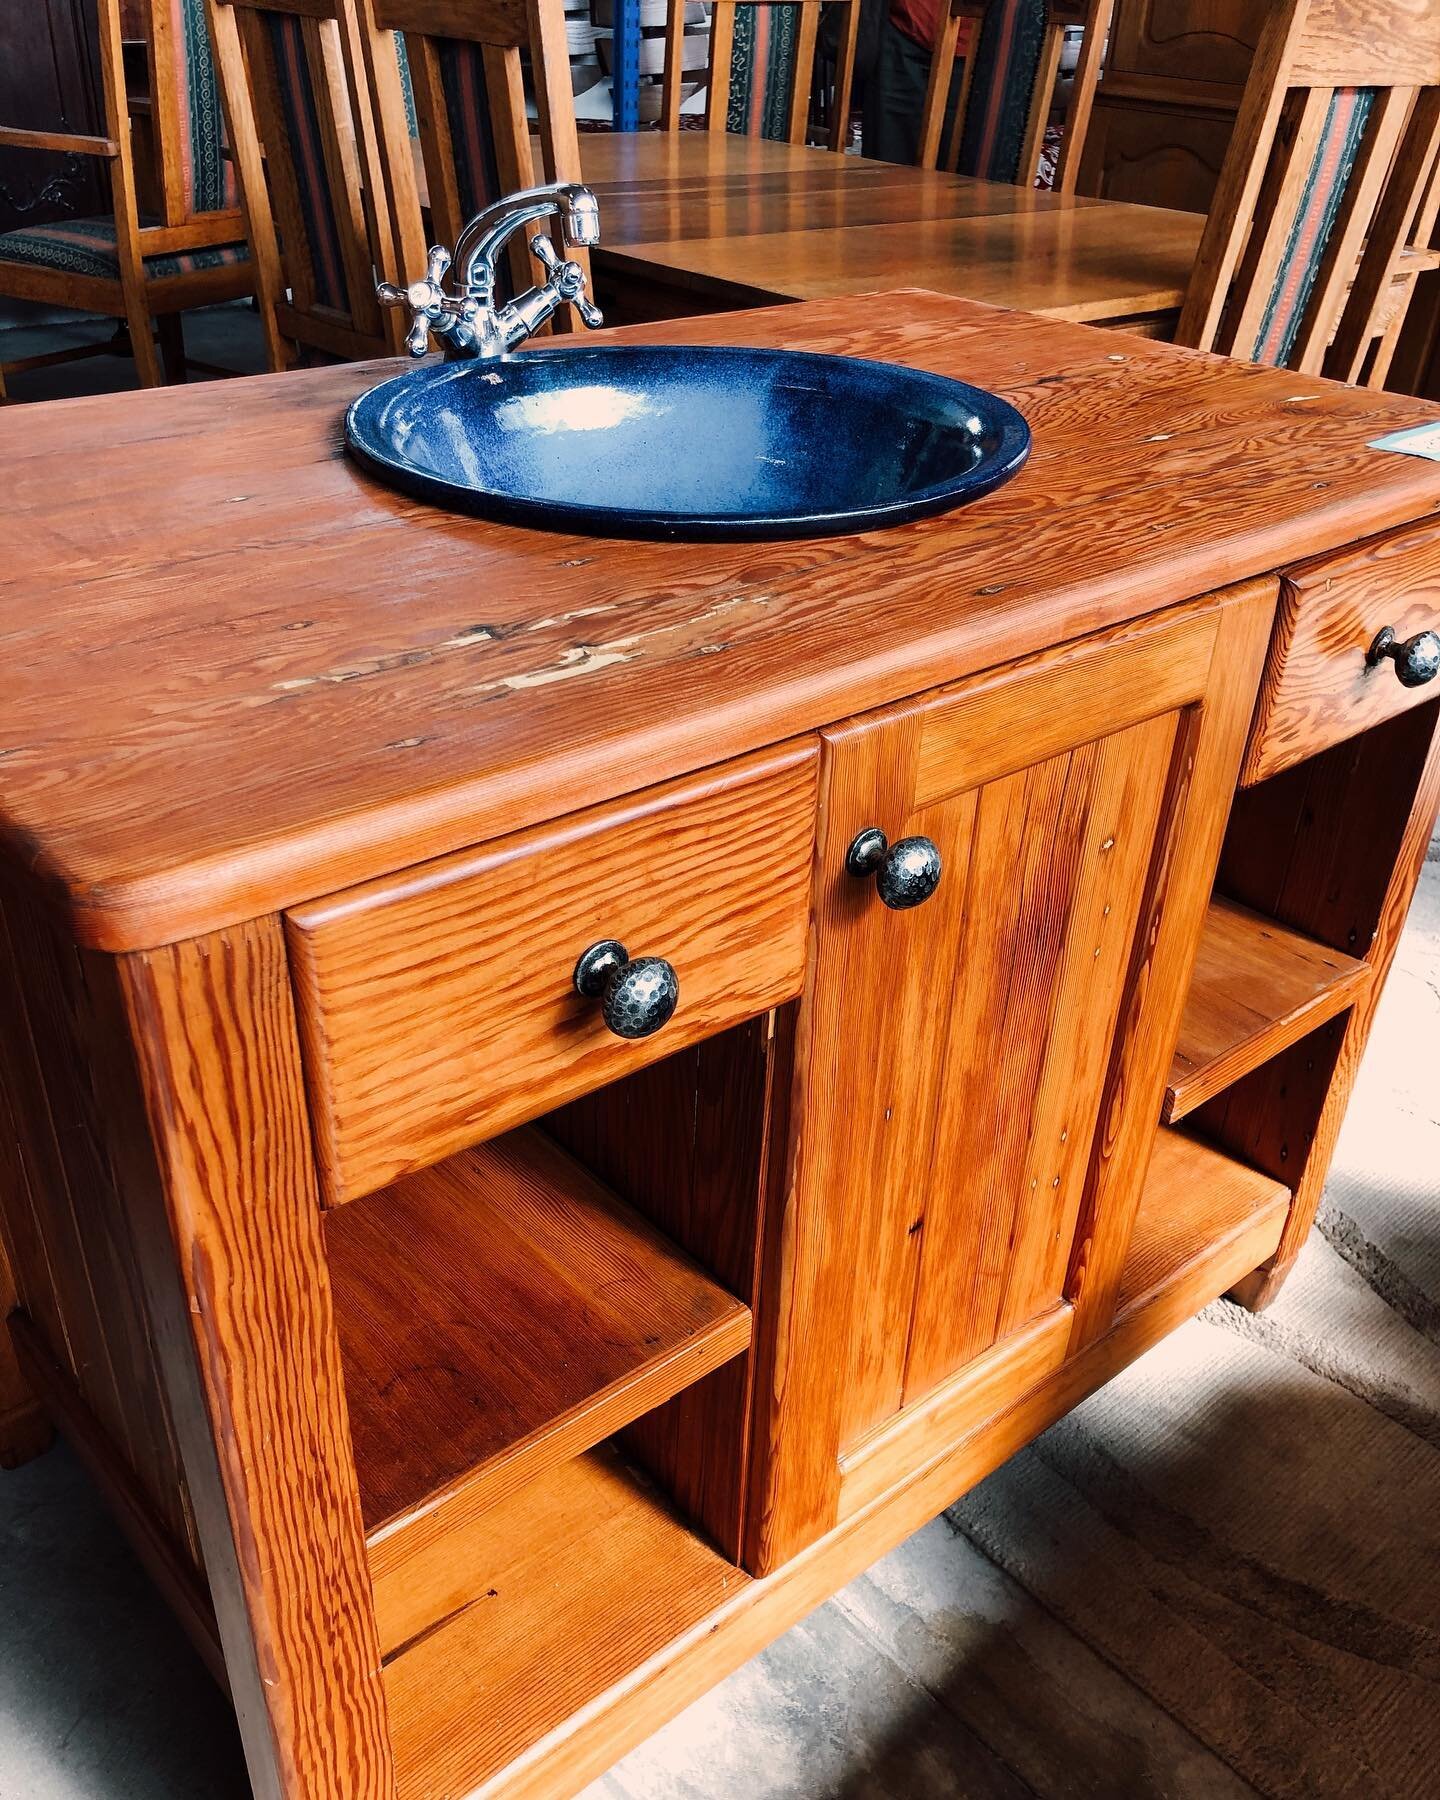 We always have great cottage-style pieces at the shop. These are some of the items we have in at the moment, stop by this week &amp; pick up something beautiful for your home 😁👌

Oregon Pine Cabinet with Basin
Price - R3250

Meelkis
Price - R4500

